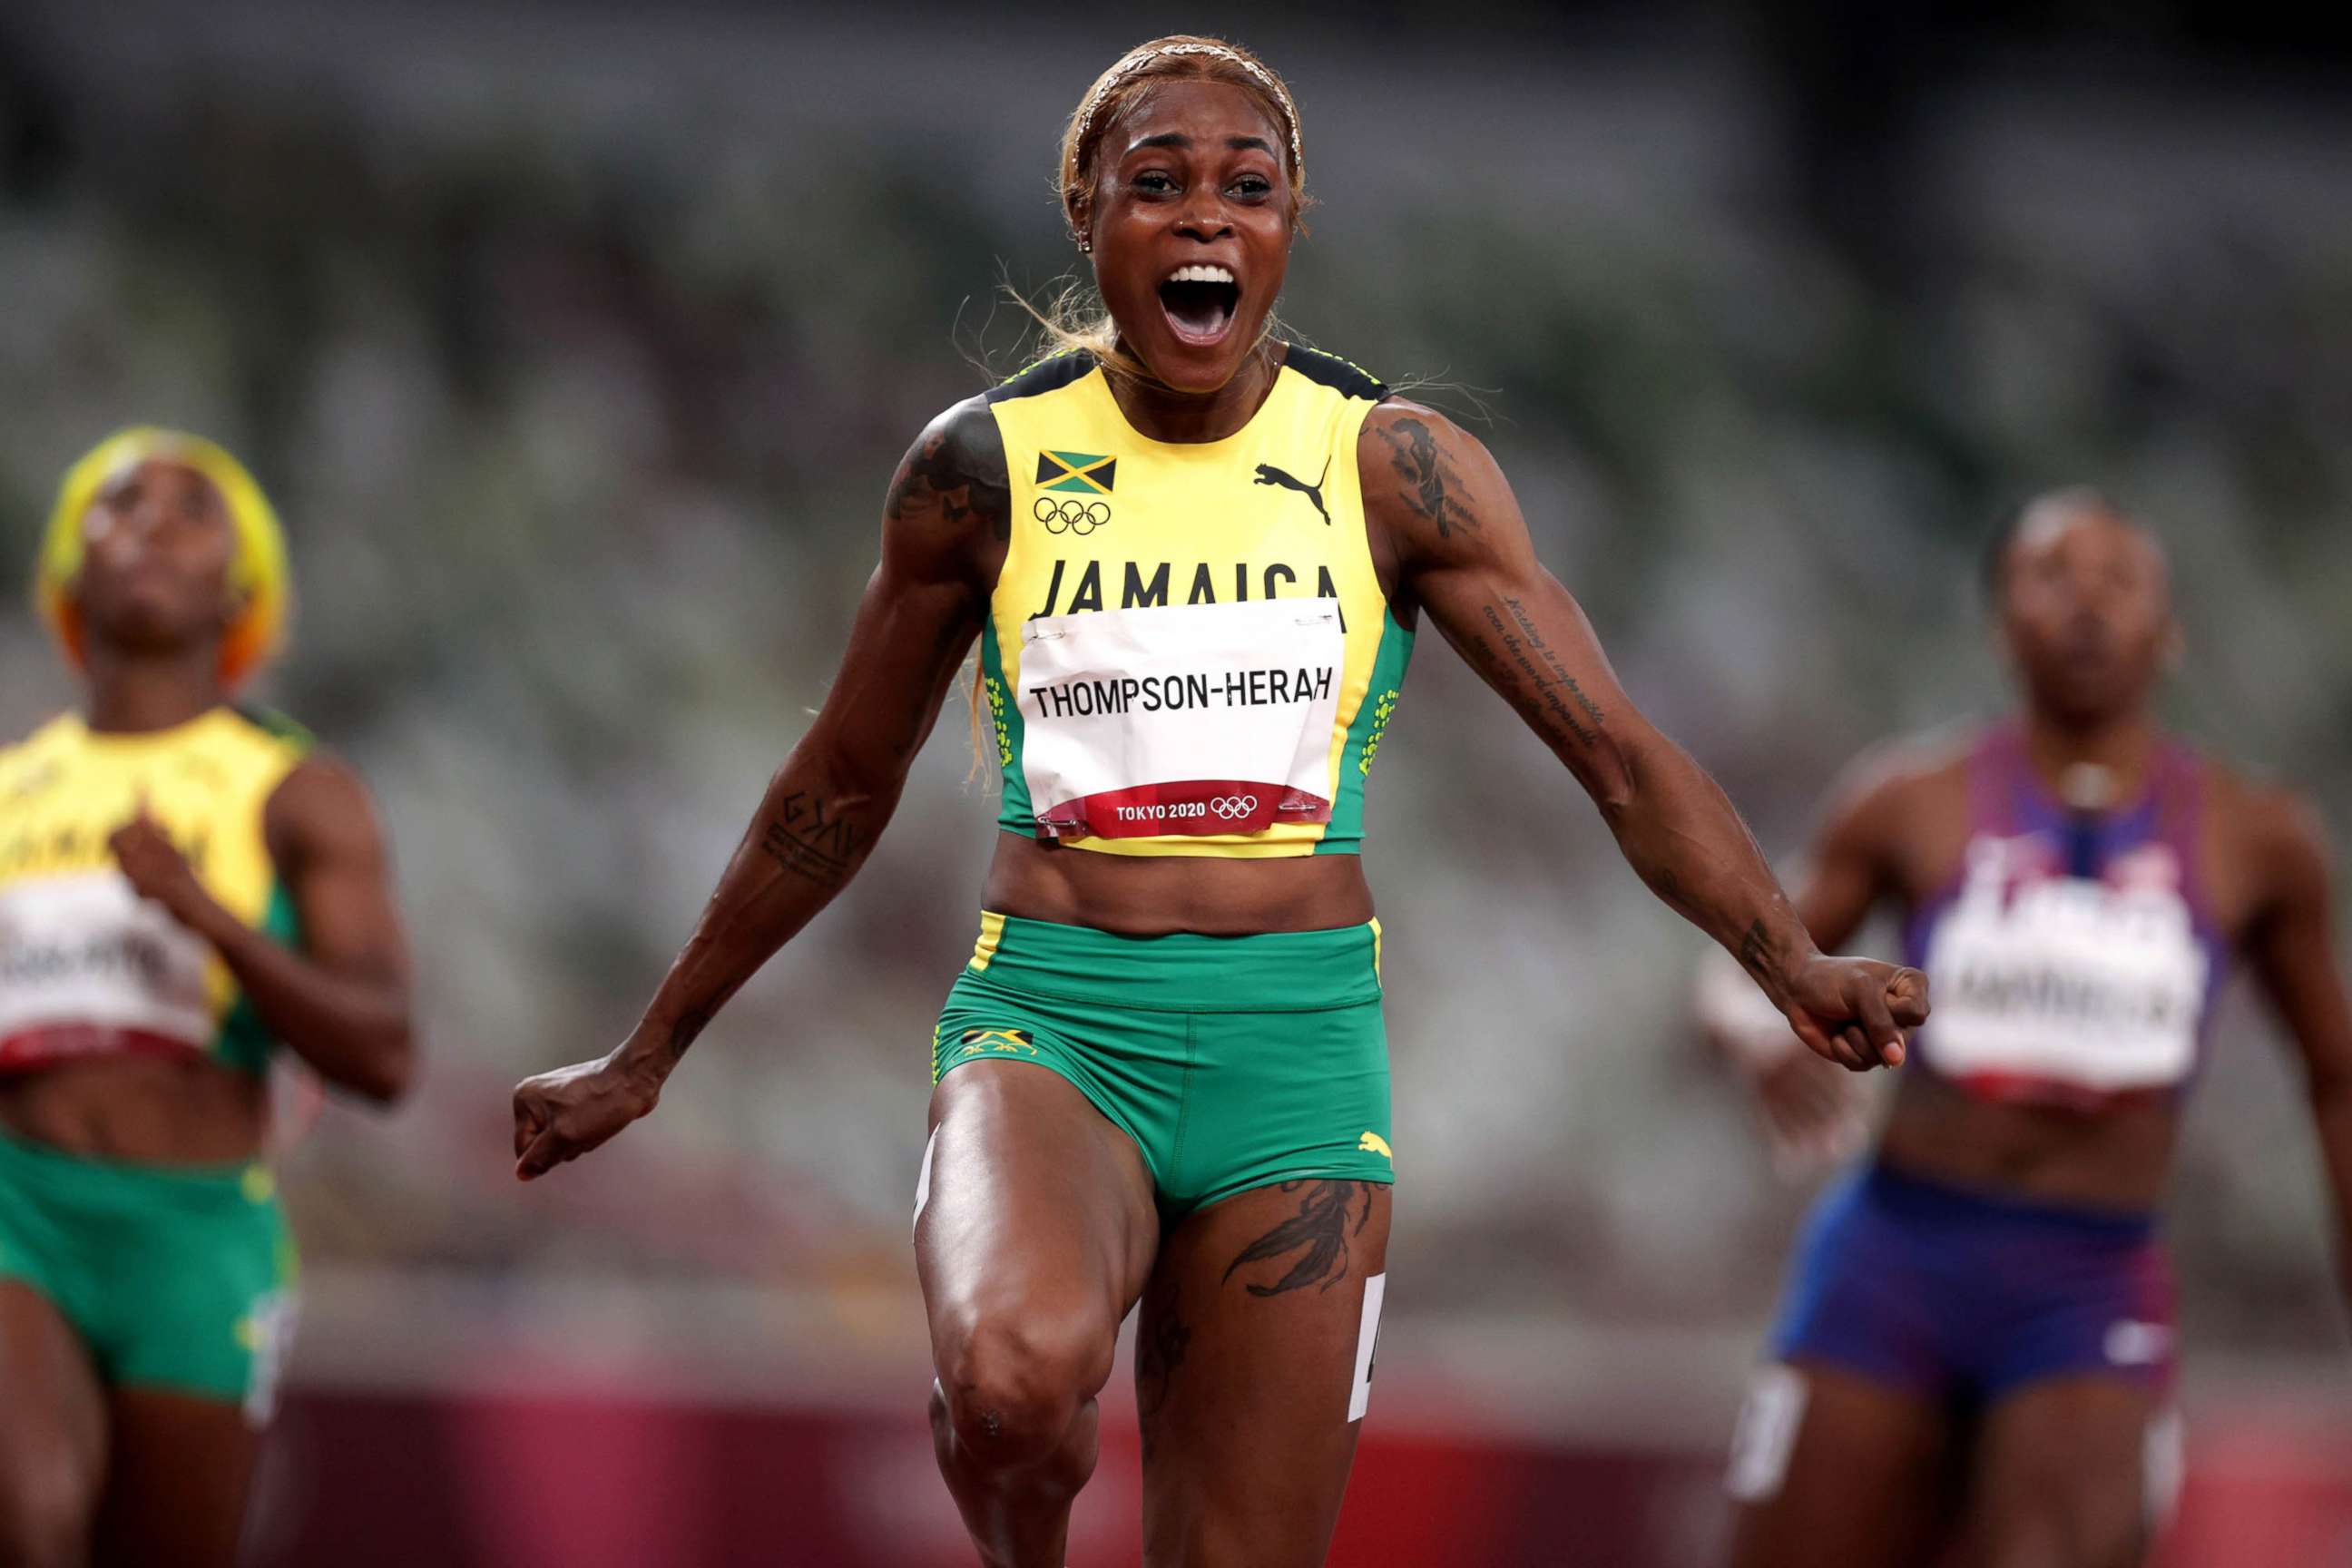 PHOTO: Elaine Thompson-Herah of Jamaica celebrates crossing the finish line to win gold in the Women's 100m Final at the Olympic Stadium, Tokyo, July 31, 2021. 